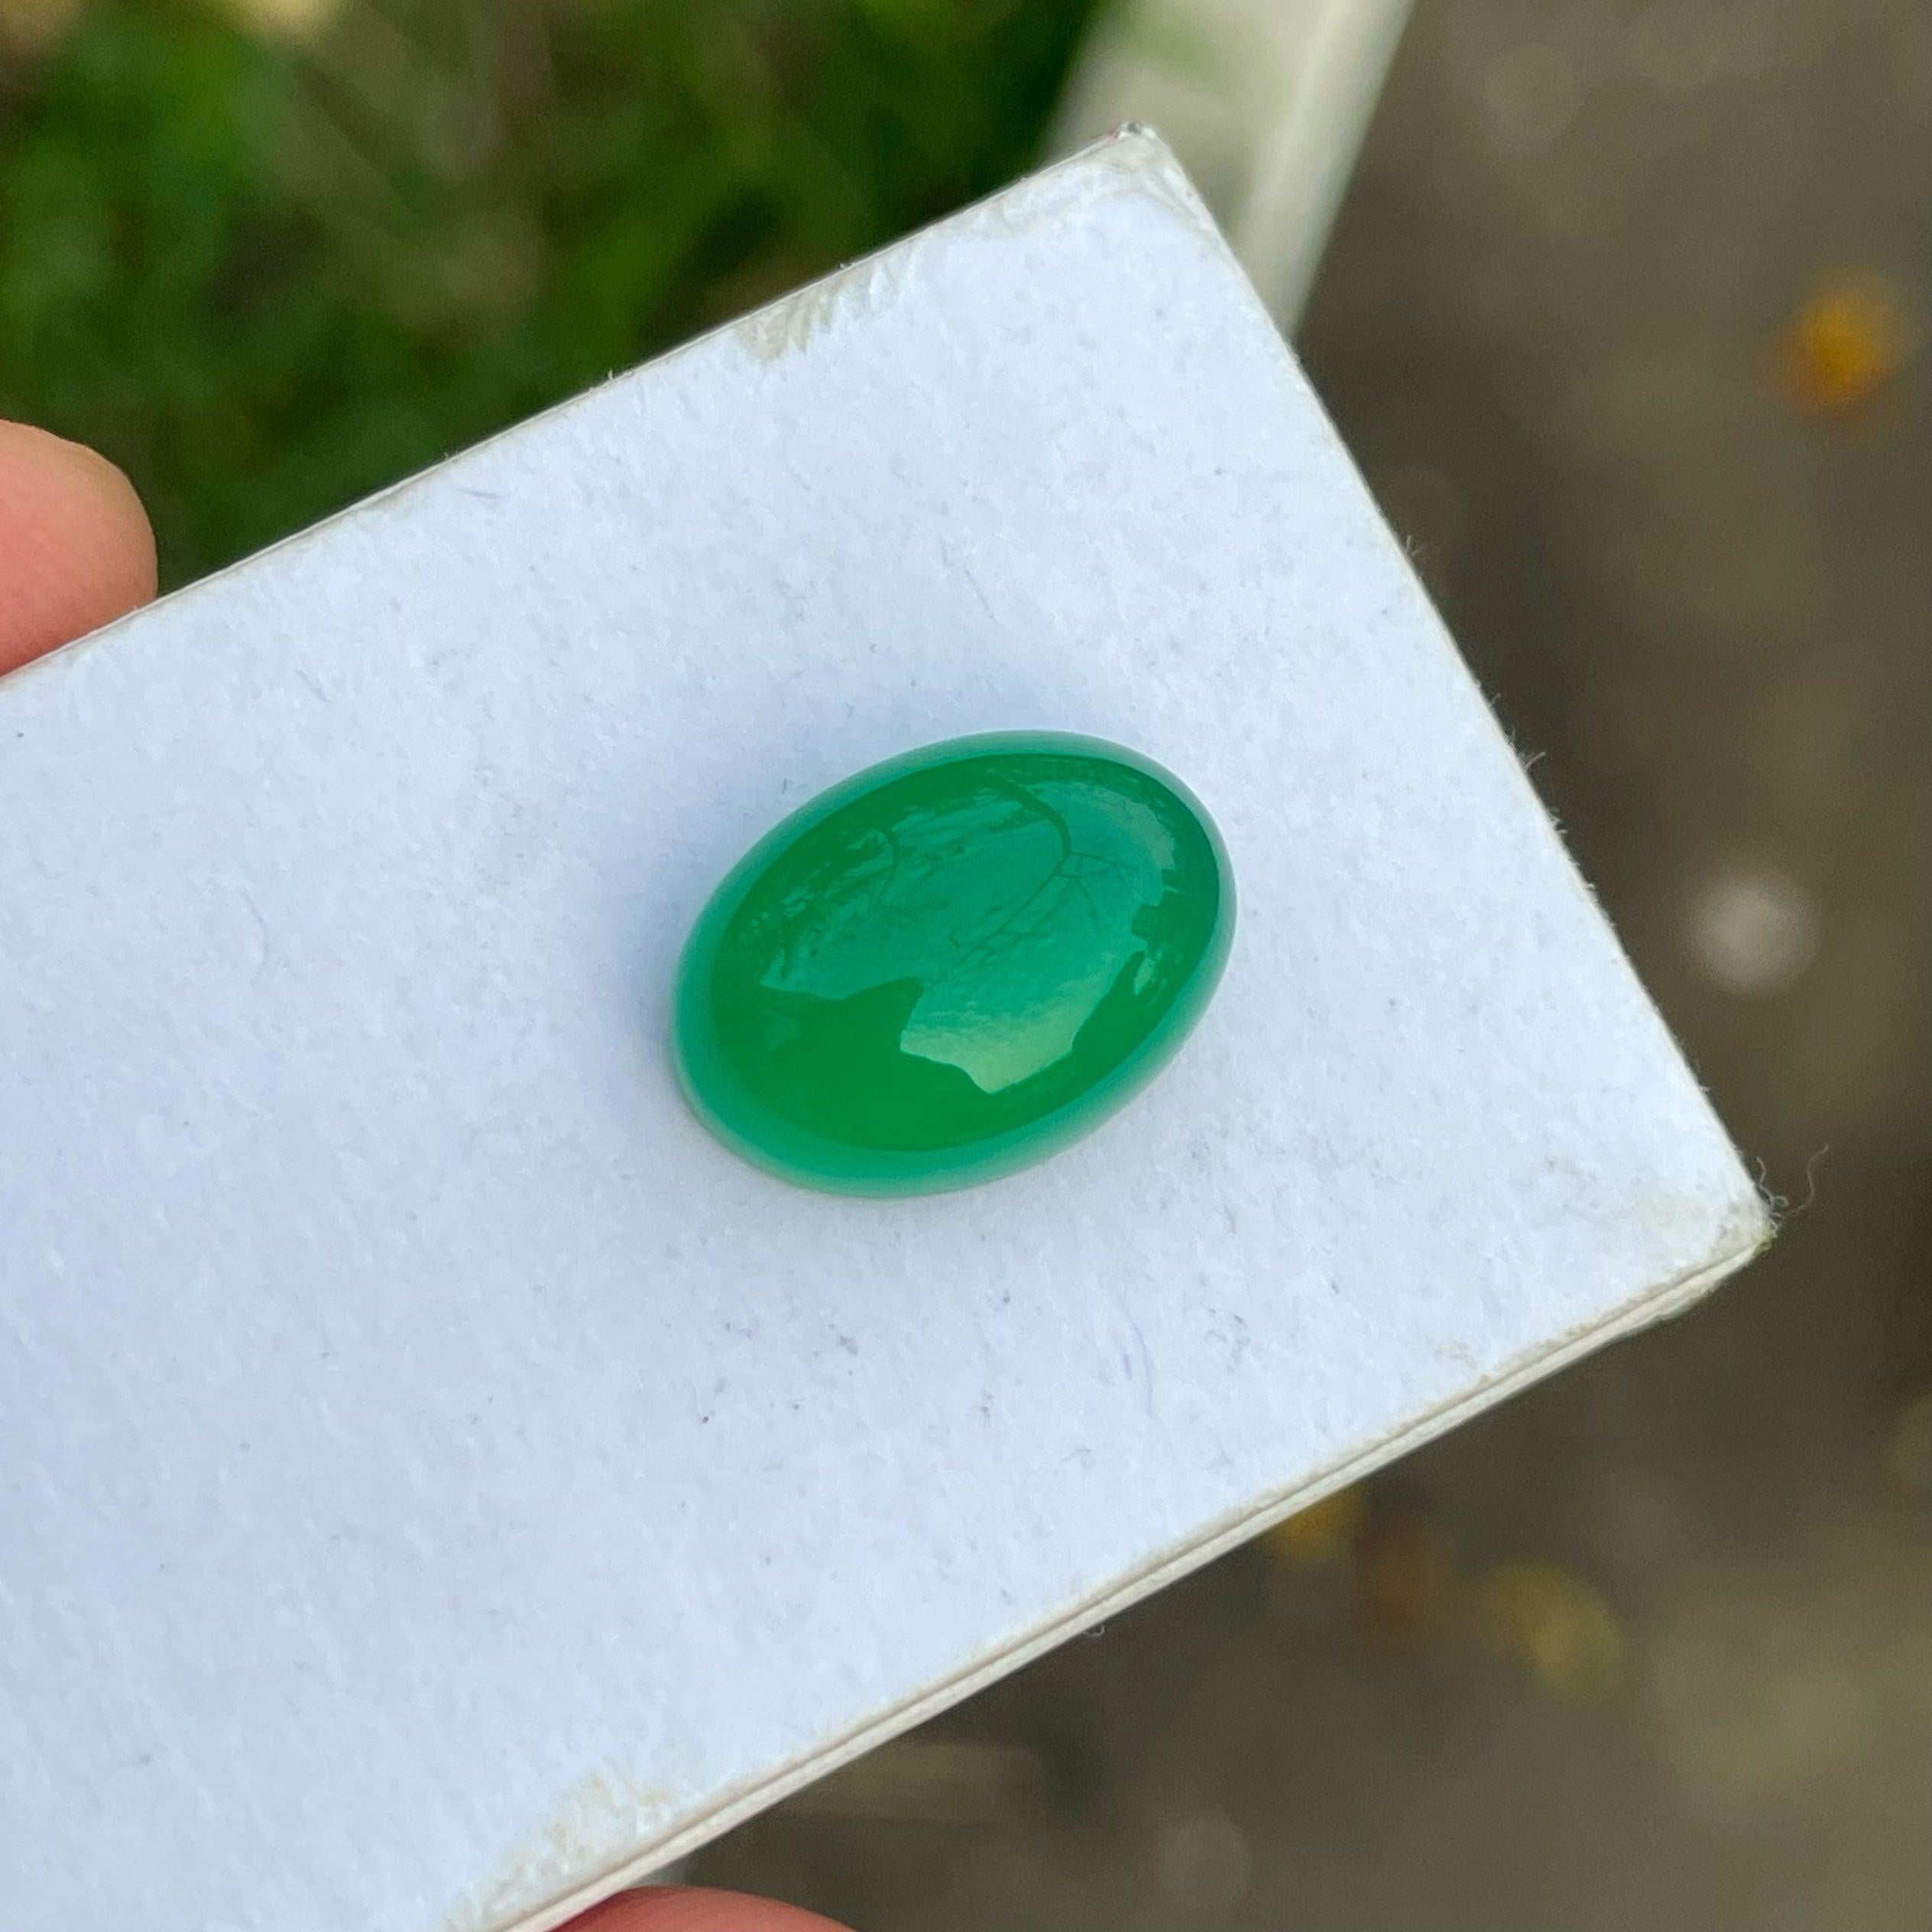 Natural Green Agate Cabochon Gemstone, available for sale at wholesale price, natural high-quality 6.65 carats flawless Diaphaneity Translucent, certified Agate from India.

Product Information:
GEMSTONE NAME: Natural Green Agate Cabochon